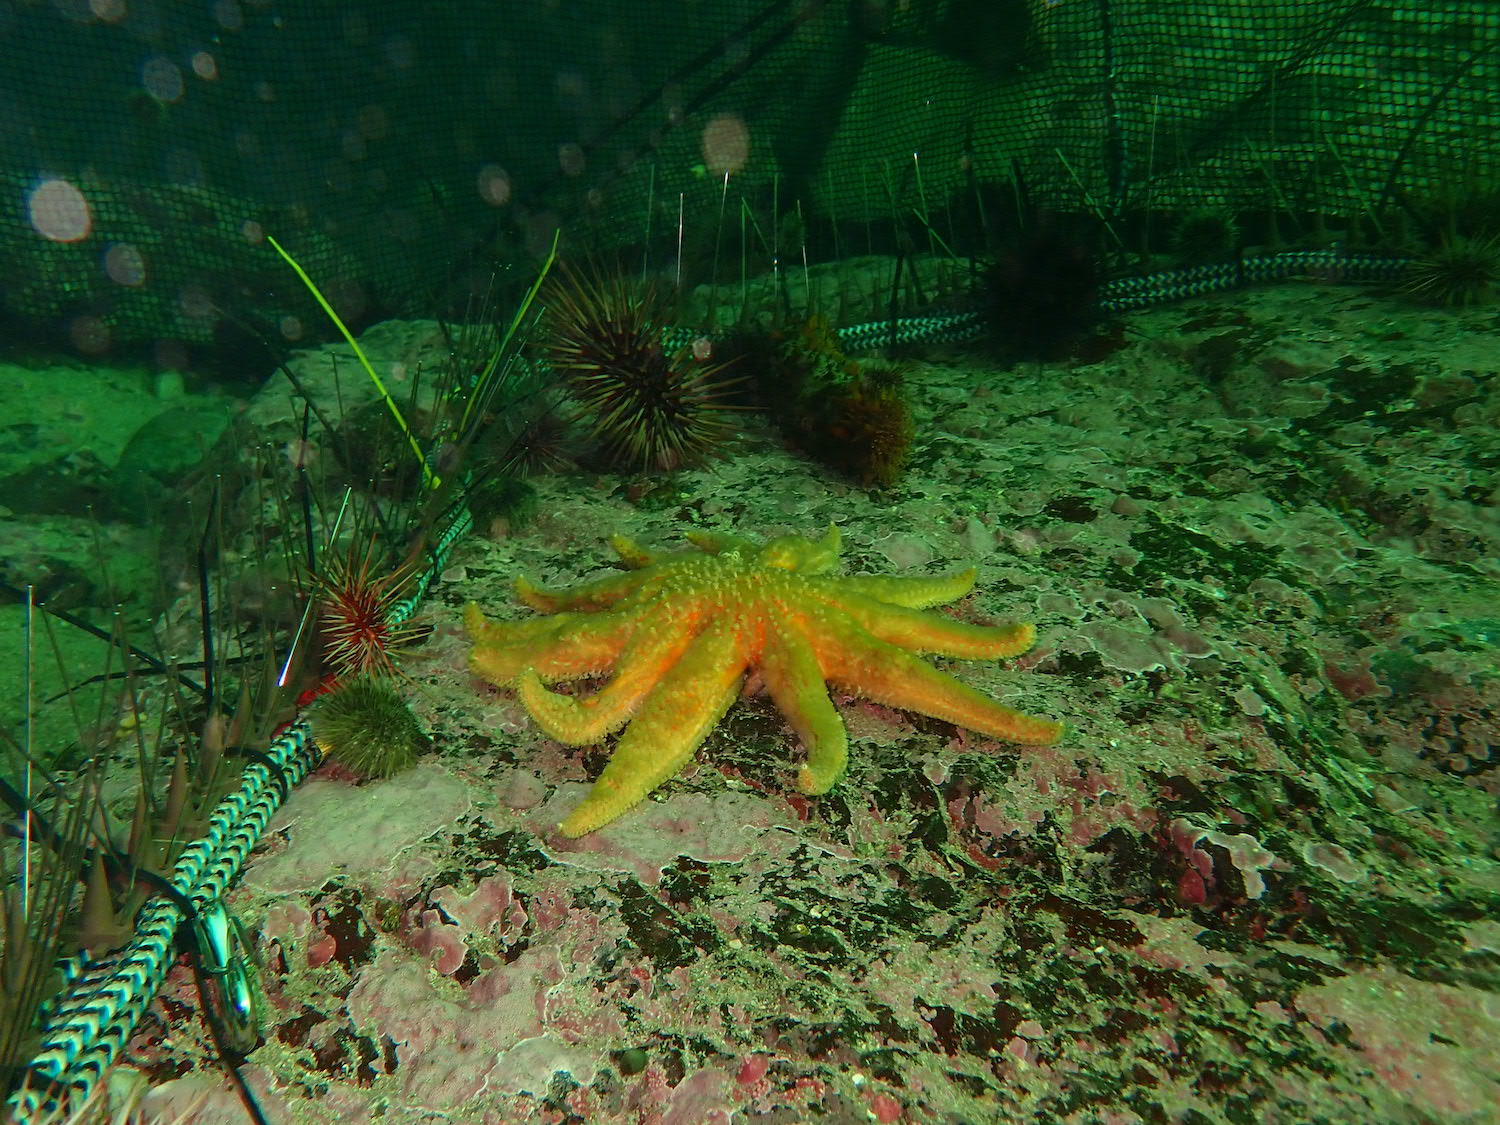 A yellow sea star with a dozen legs sits on a rock seafloor in an underwater pen. Several sea urchins — spherical creatures covered with spines — of different sizes and colors push up against a barrier of upright pins inside the pen.